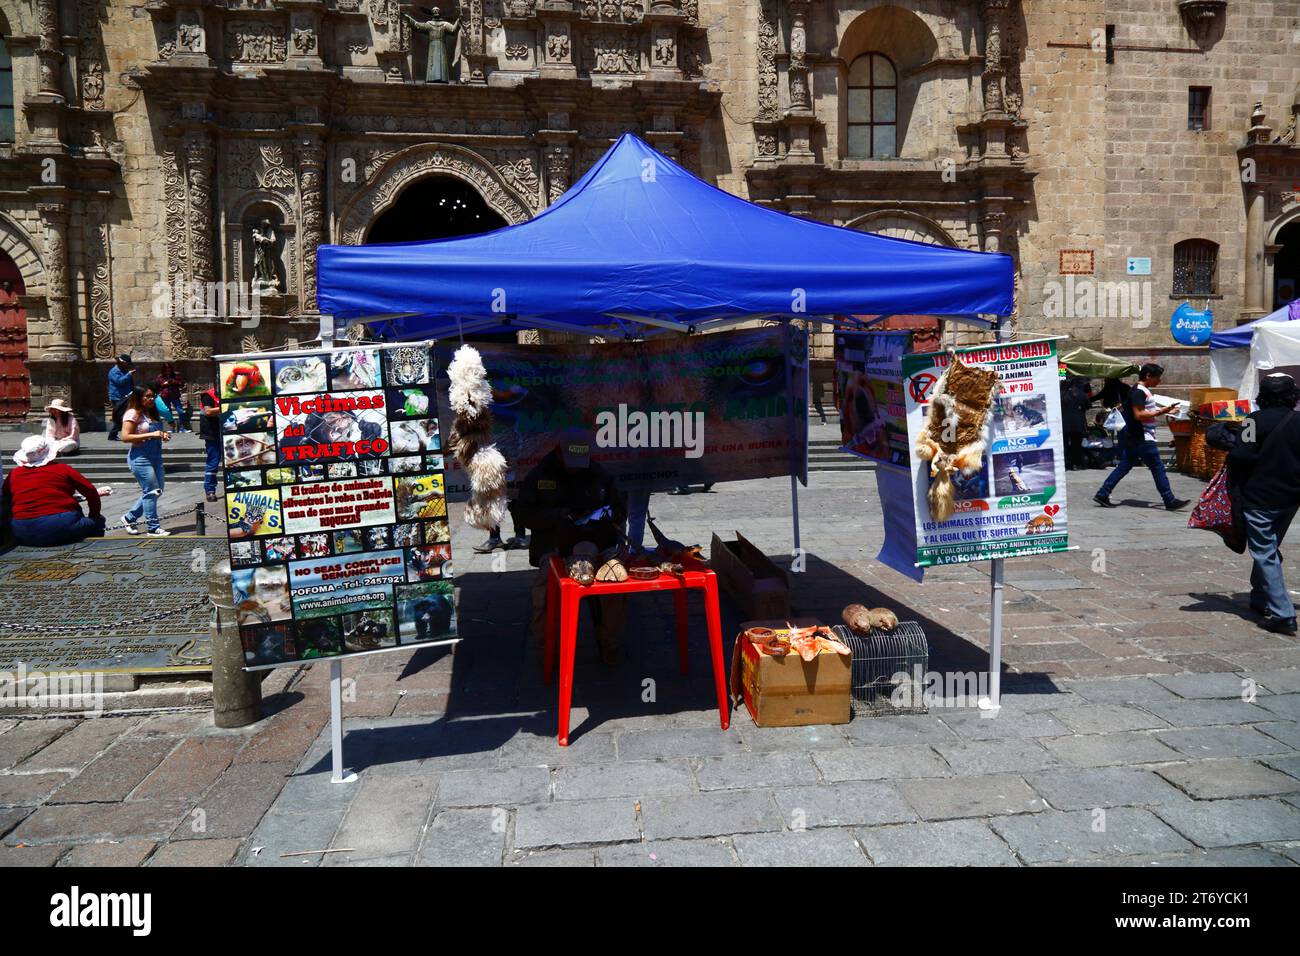 A stand by POFOMA (Policía Forestal y de Preservación del Medio Ambiente, the Forestry and Environment Preservation Police) to educate the public about about illegal wildlife trafficking and measures to take to report it in Plaza San Francisco, La Paz, Bolivia Stock Photo